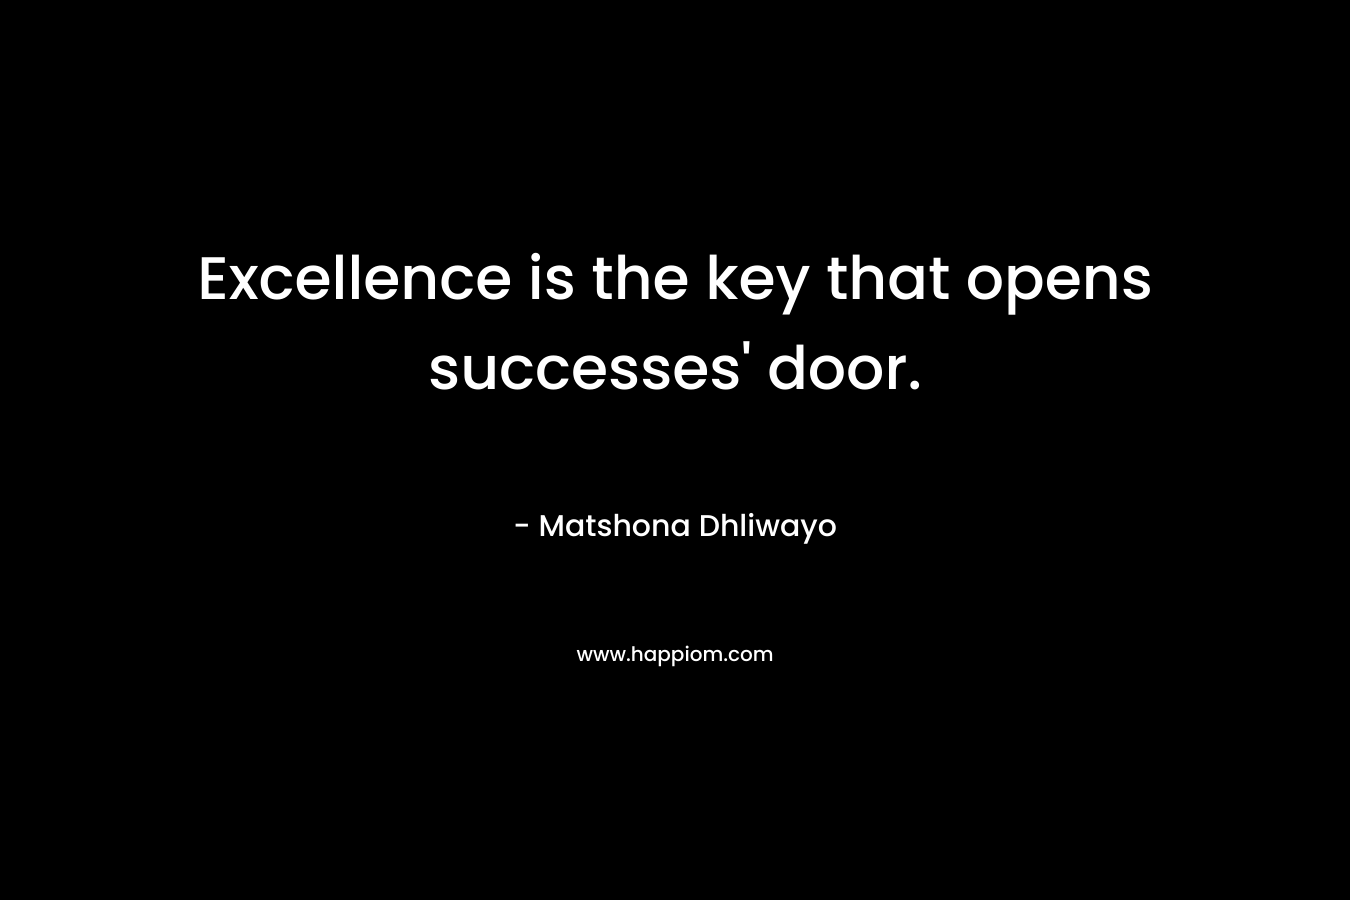 Excellence is the key that opens successes' door.